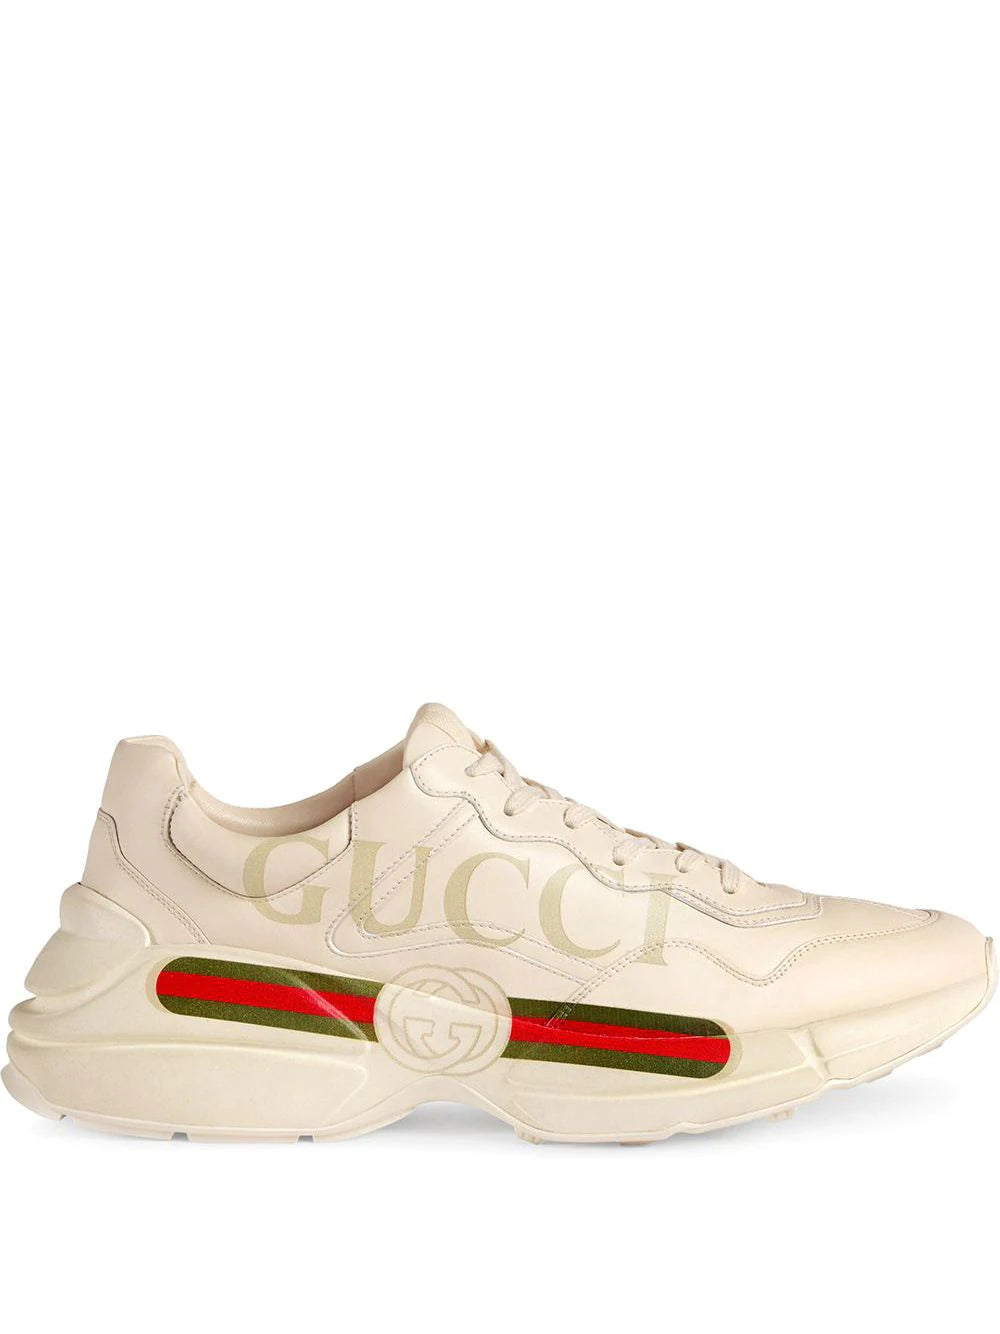 Gucci Rhyton-logo leather sneakers